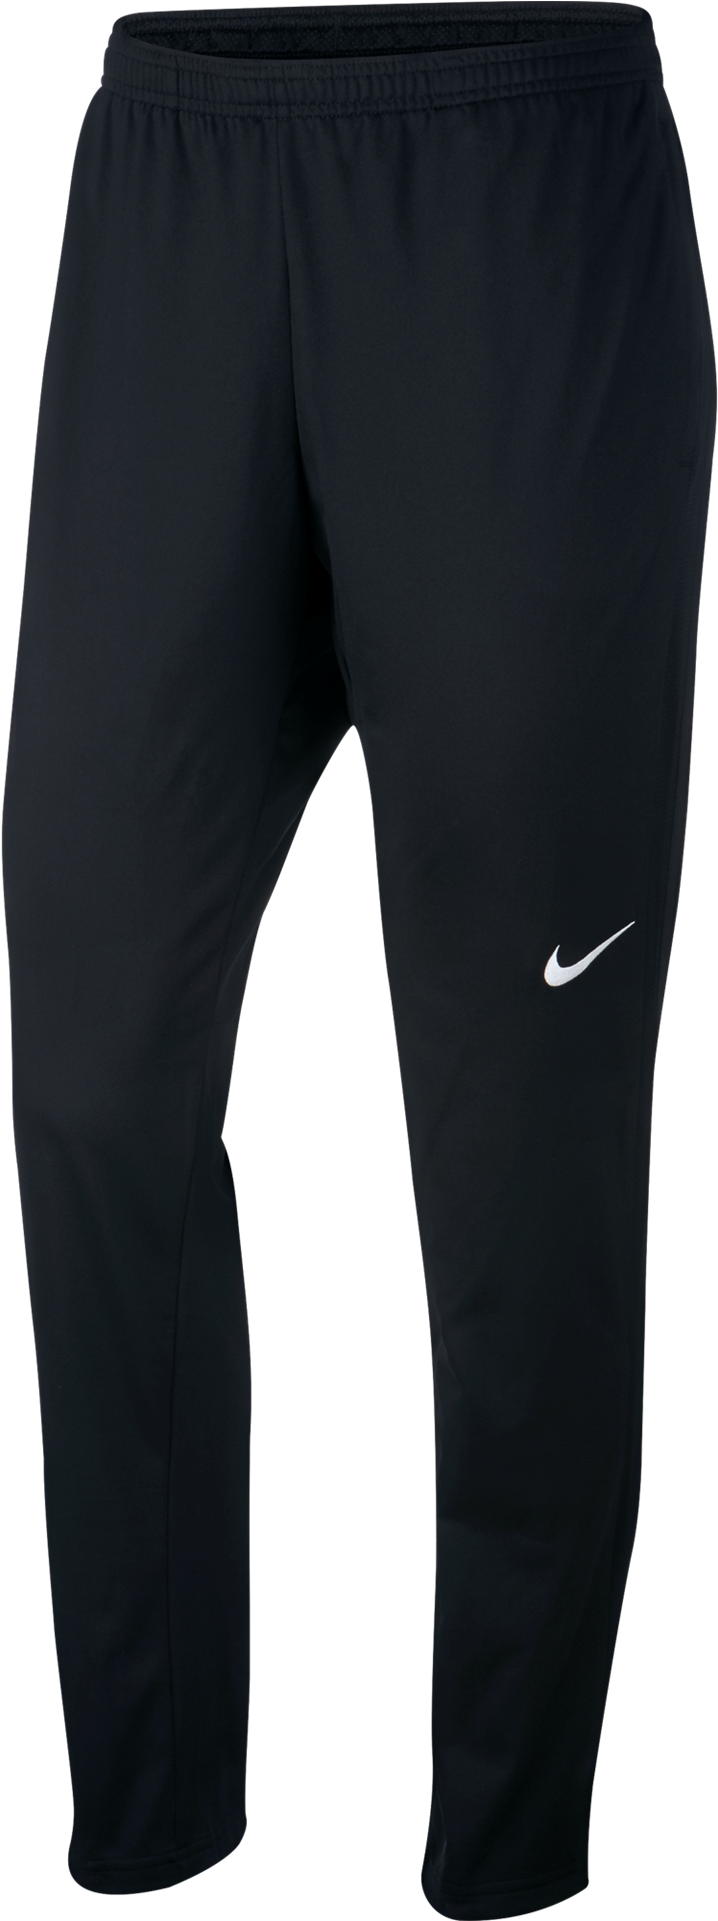 Picture Of Nike Women's Academy 18 Tech - Nike Bliss Victory Pants (1920x1920), Png Download